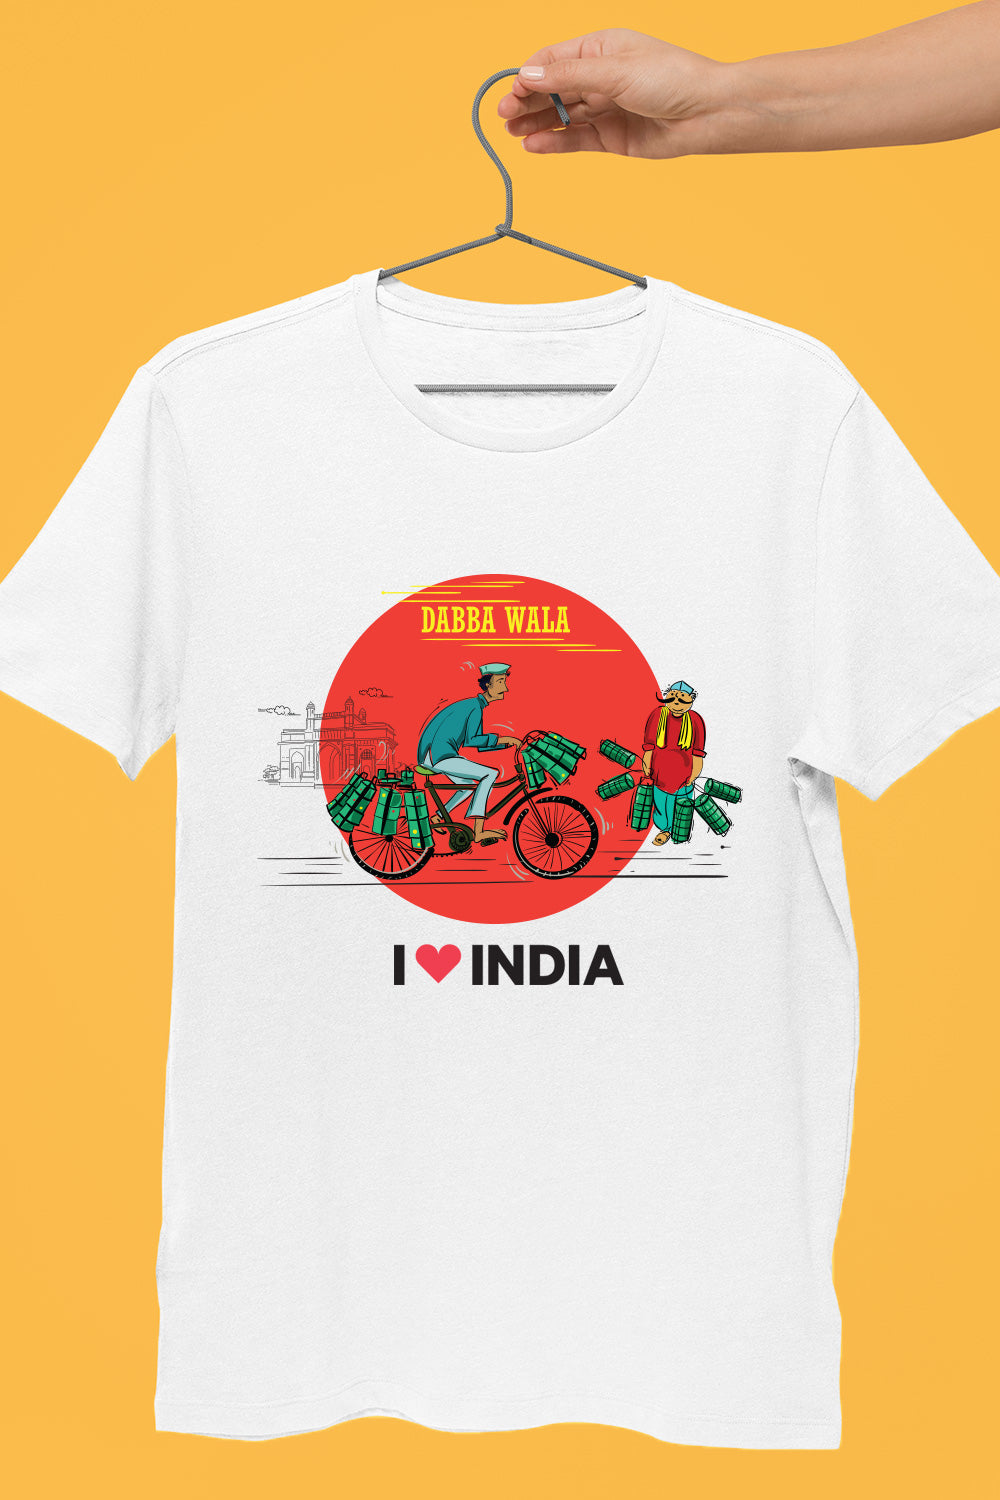 Mumbai Dabbawala - Styched in India Graphic T-Shirt White Color